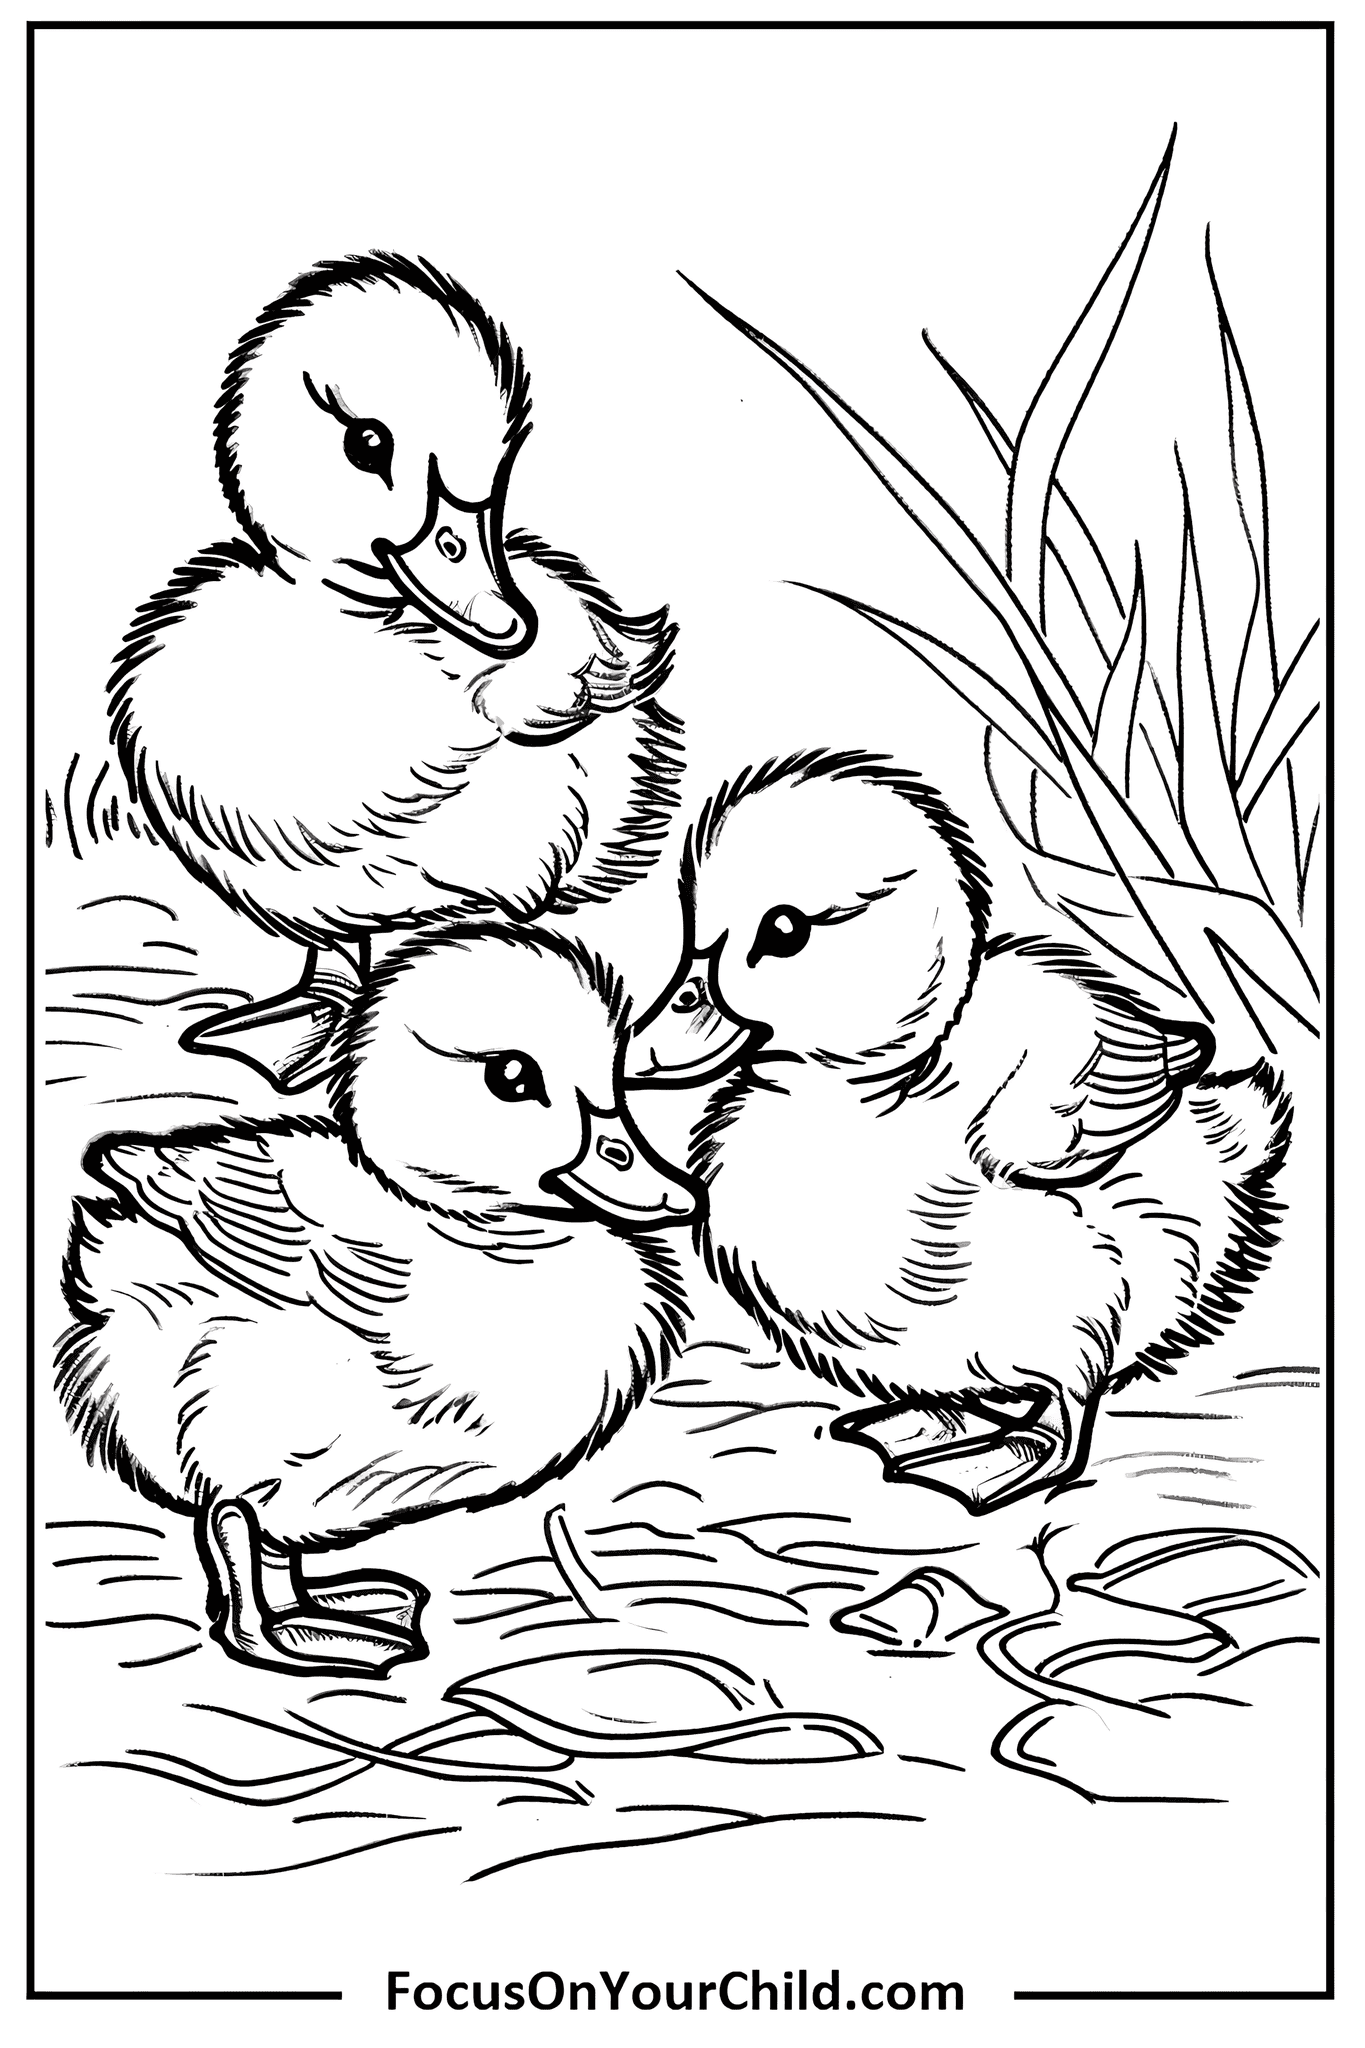 Three cute ducklings floating on water, with reeds in the background.